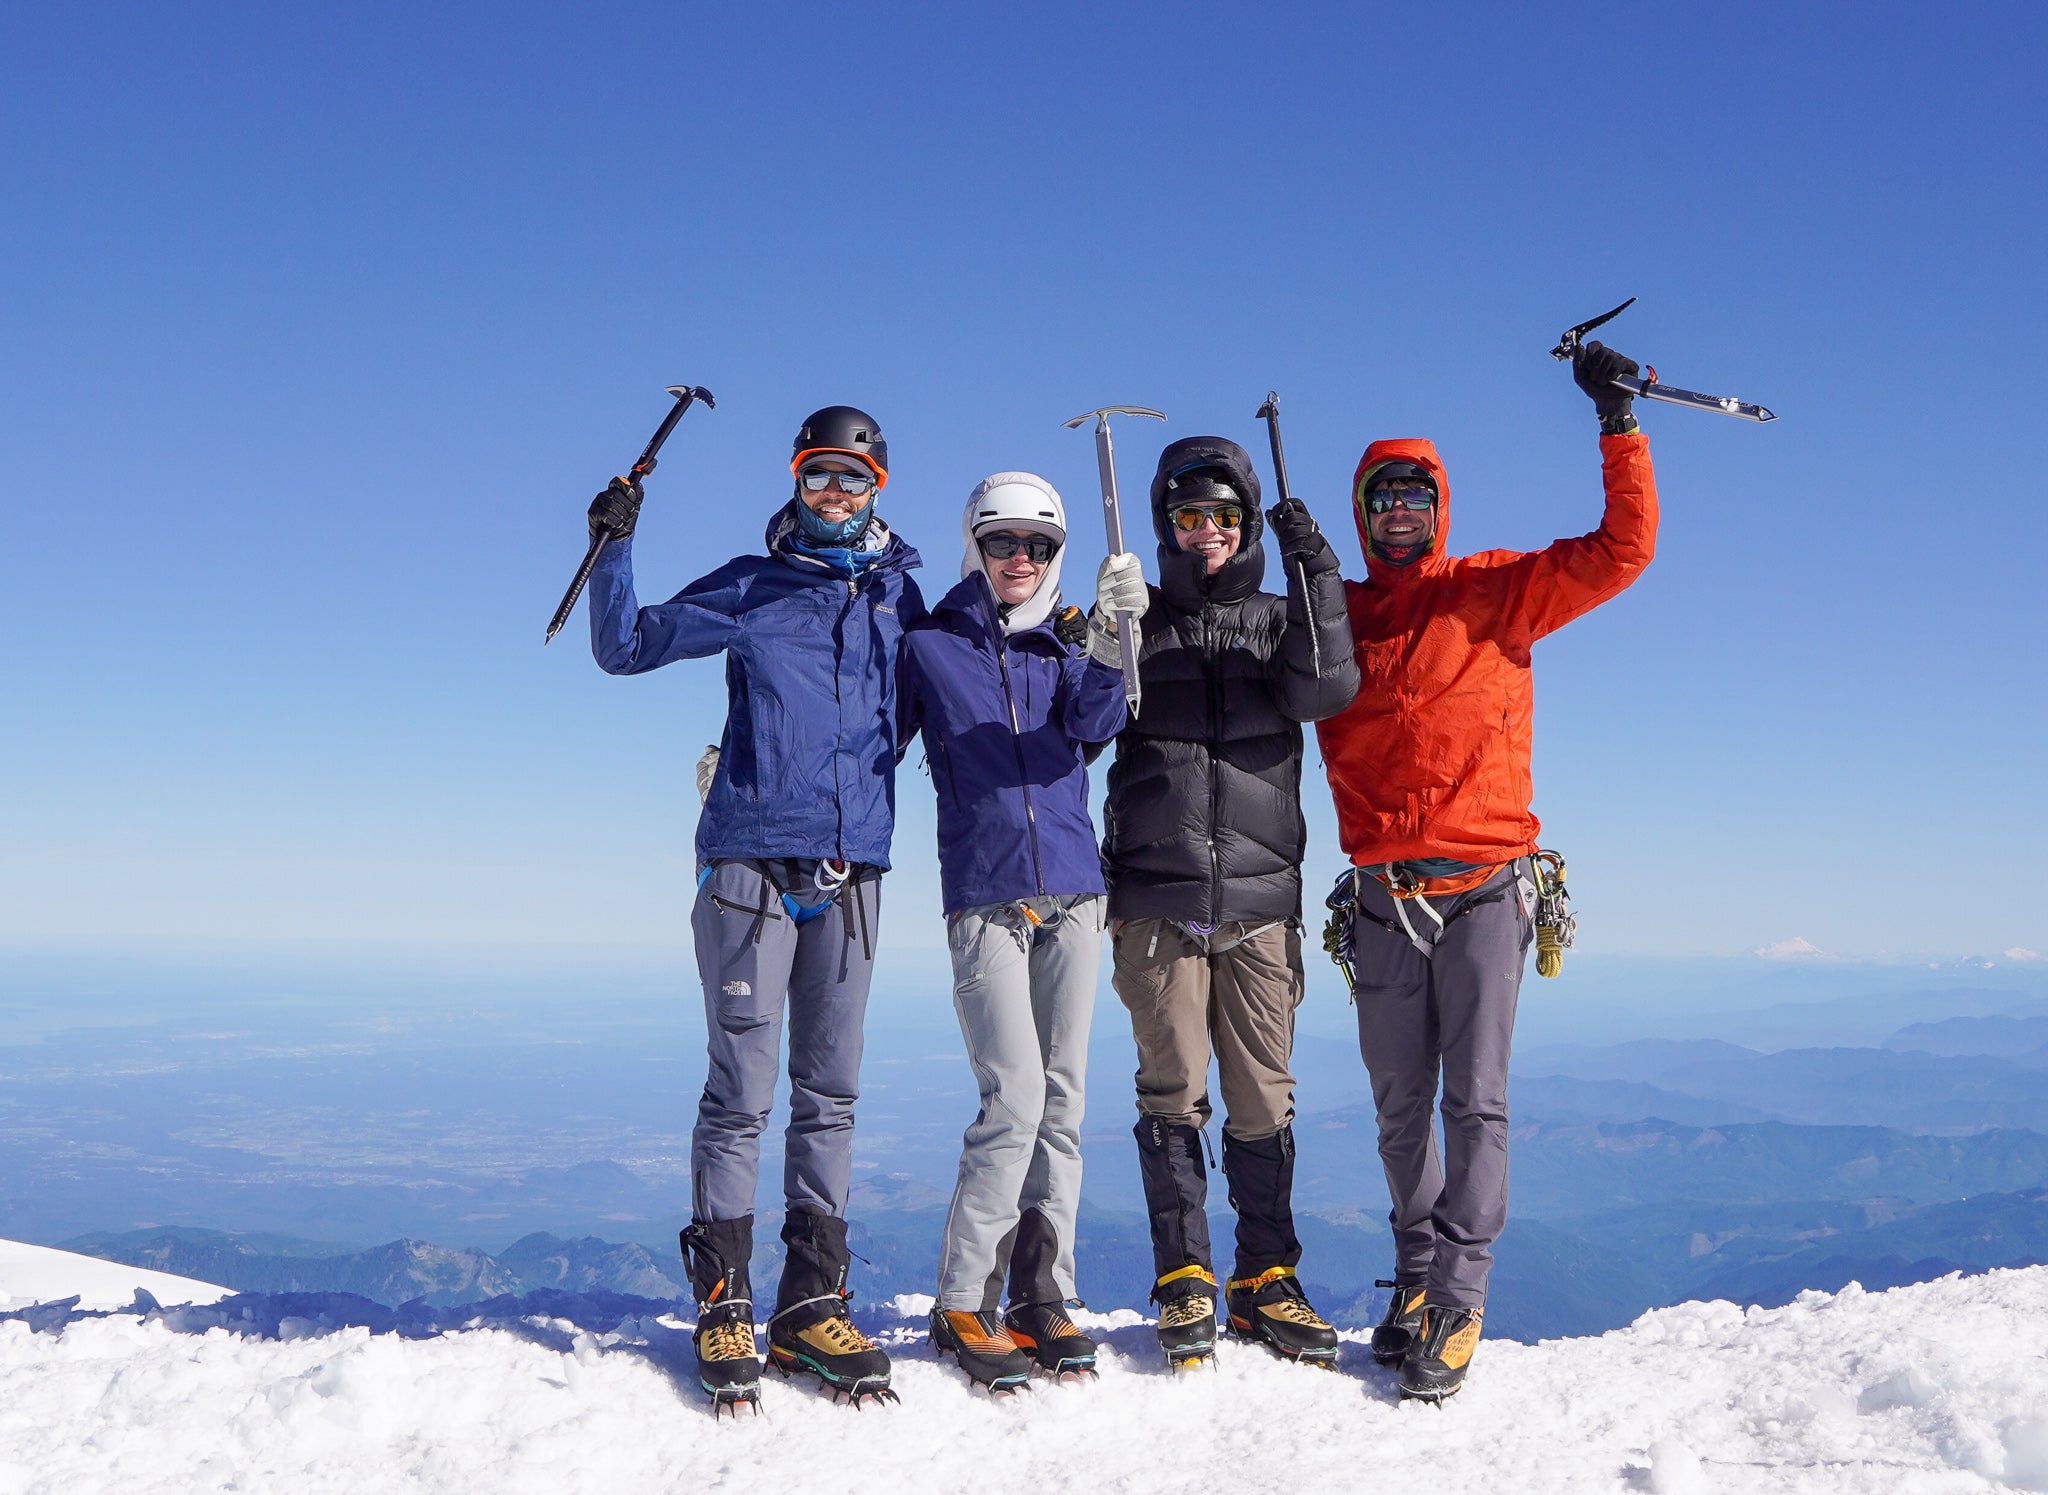 A Blackbird Mountain Guides team on the Summit of Mount Rainier on our Rainier Summit and Skills Expedition